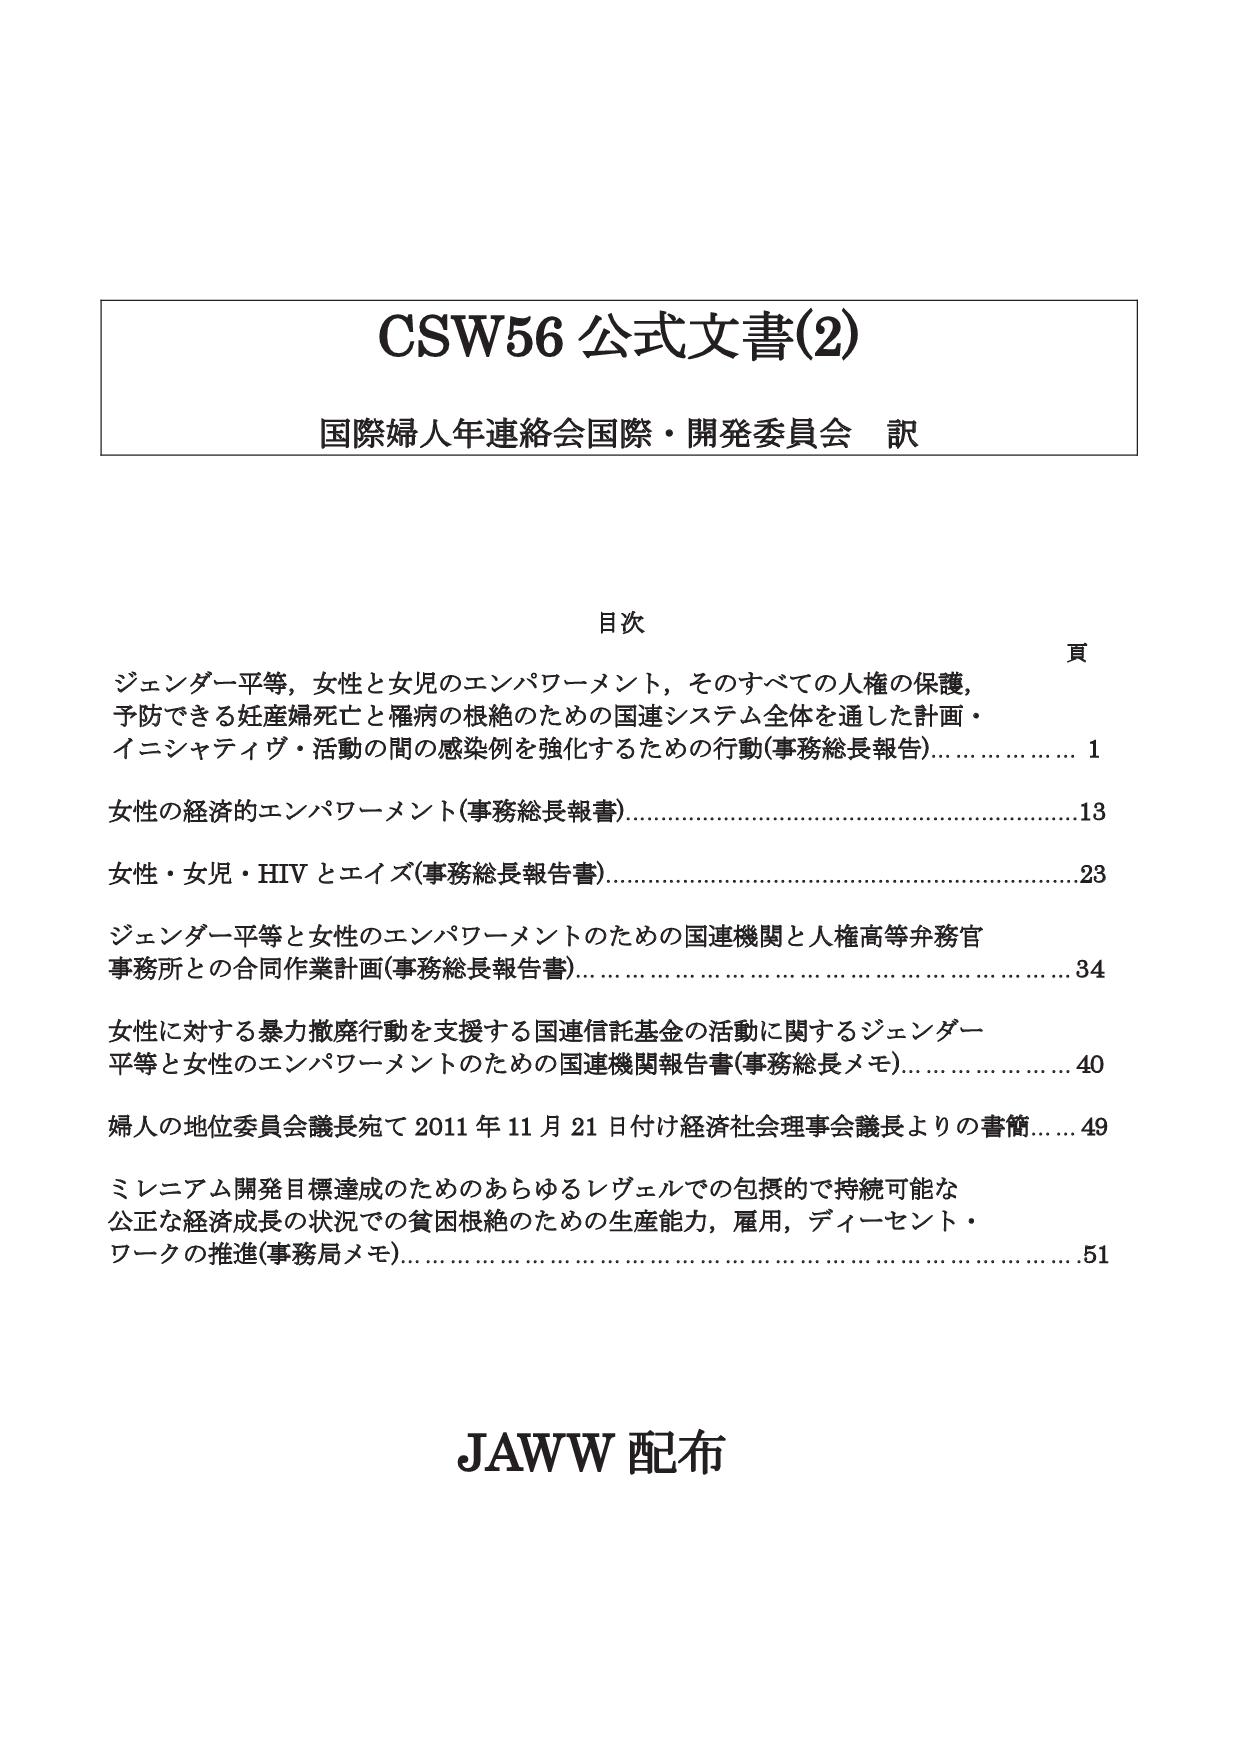 2012 CSW56公式文書(2) 表紙その２